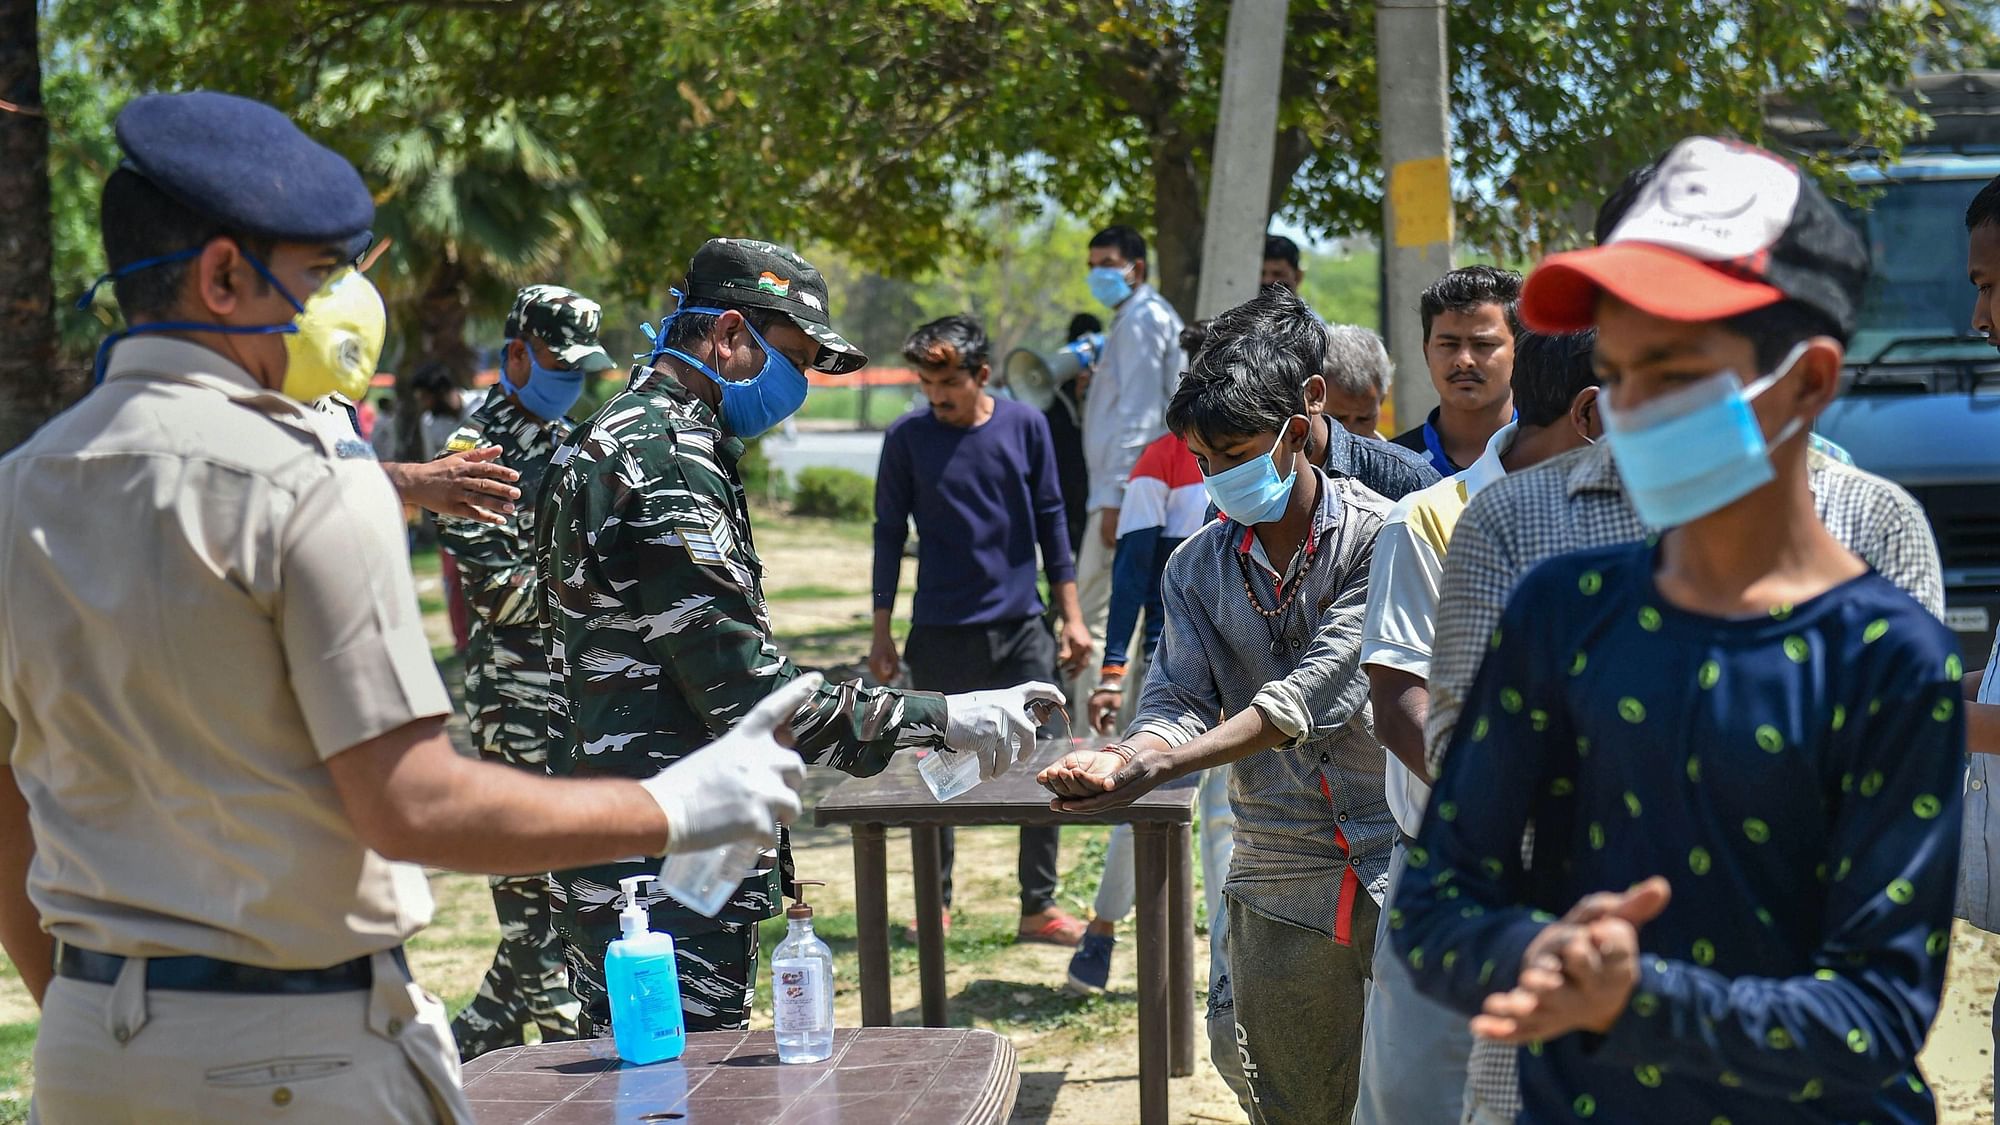  CRPF personnel pump hand sanitiser on the hands of people during a nationwide lockdown, imposed in the wake of coronavirus pandemic. Representational image.&nbsp;